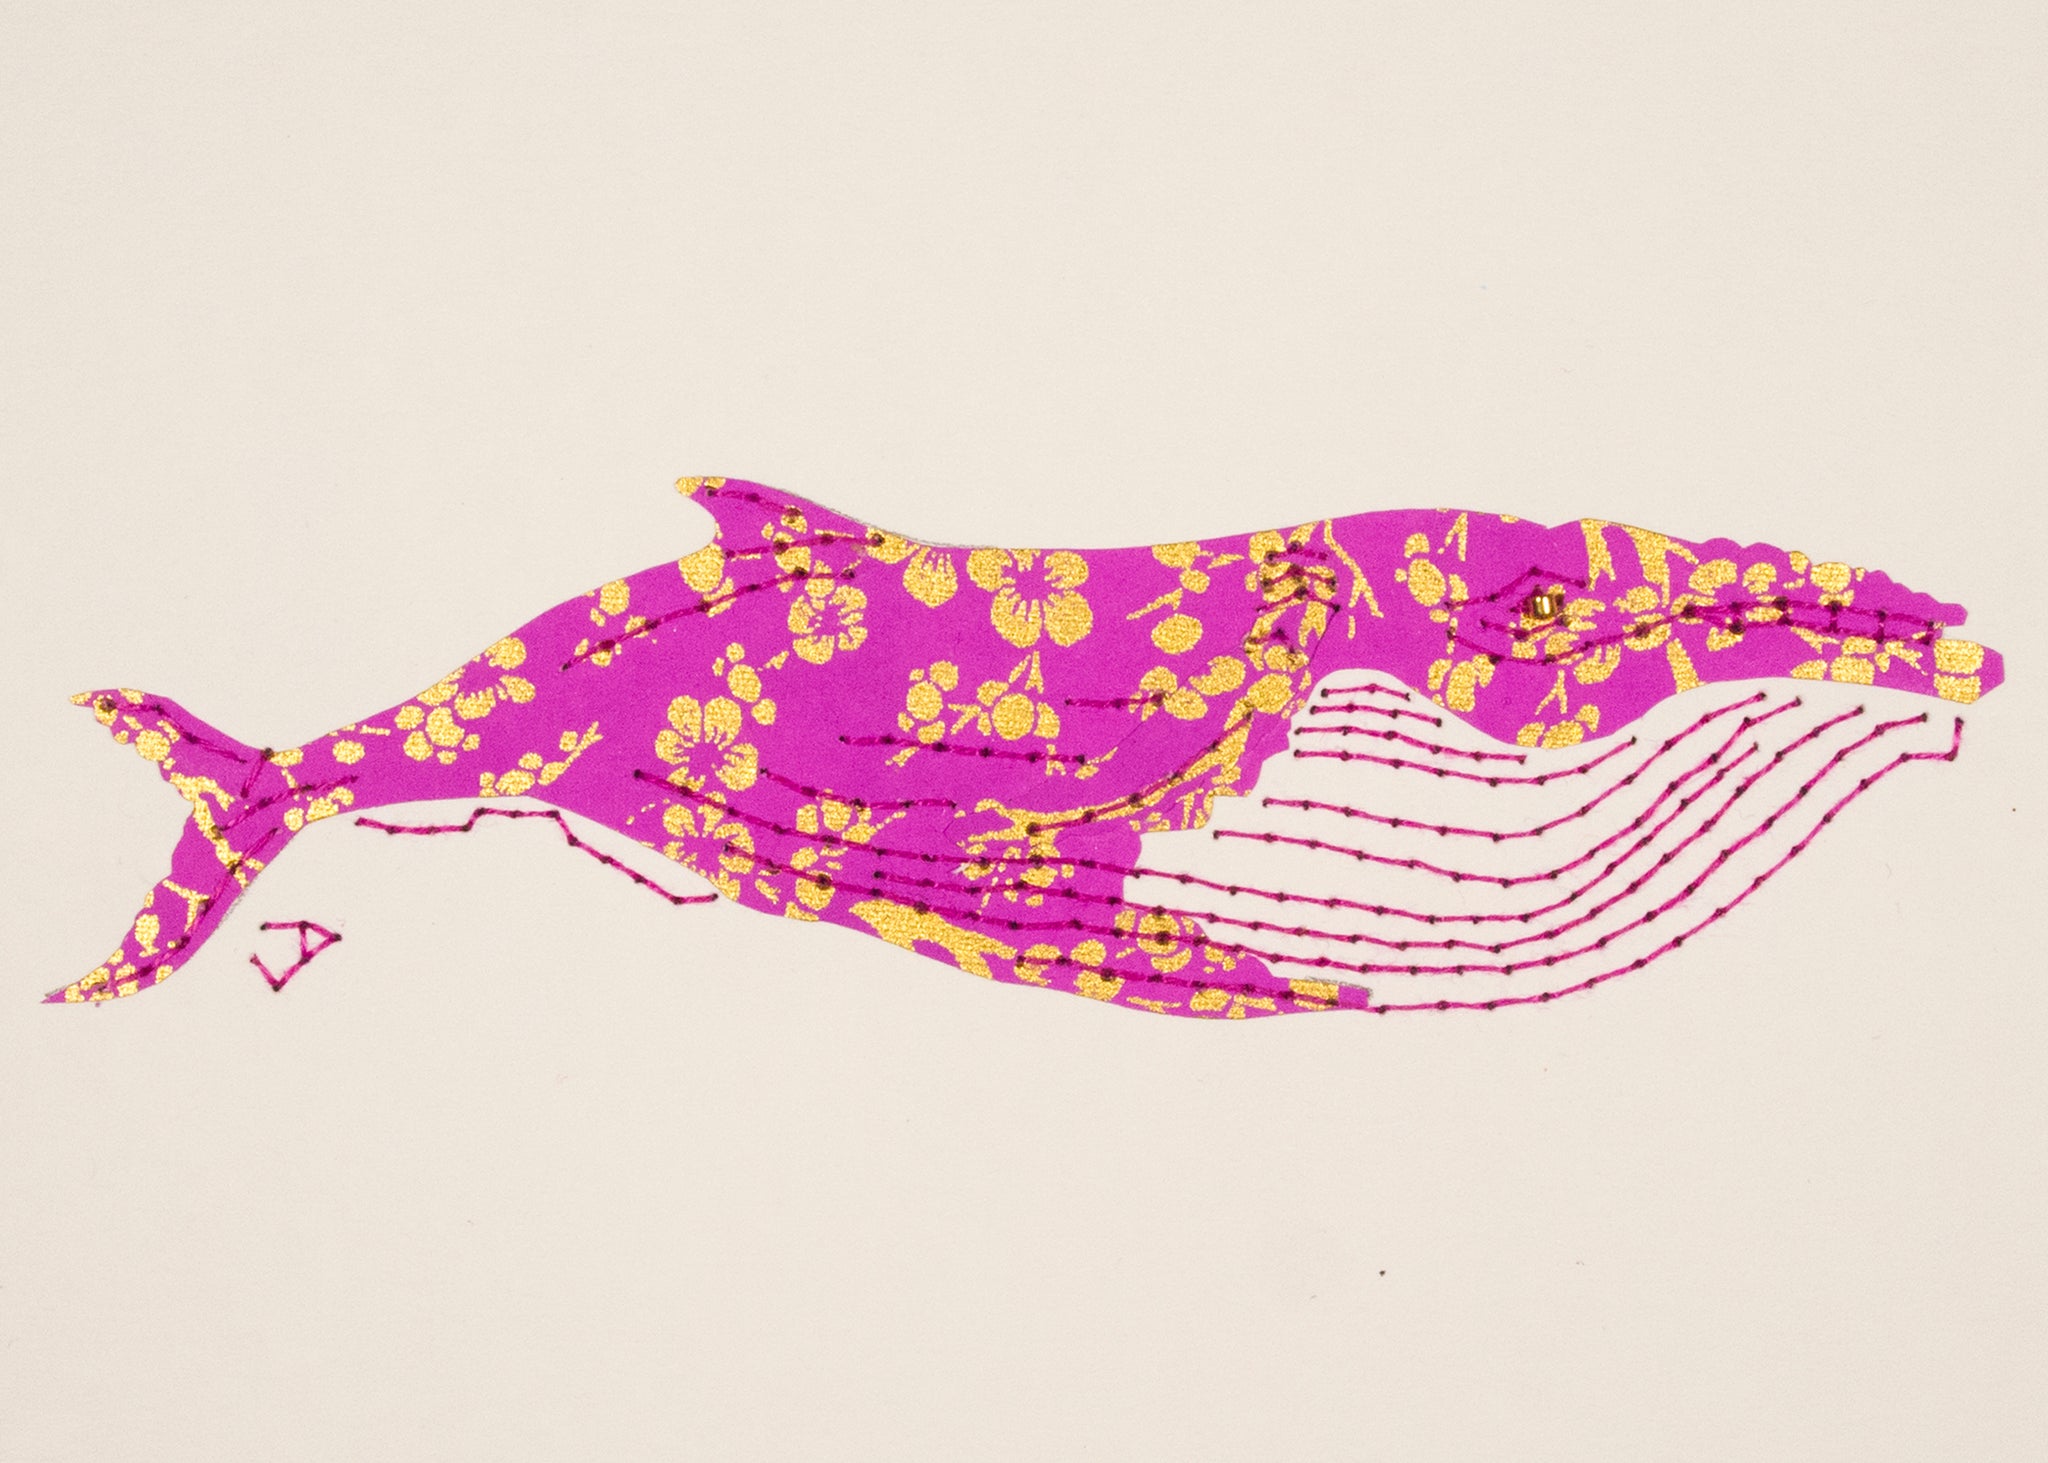 Humpback Whale in Gold and Mauve